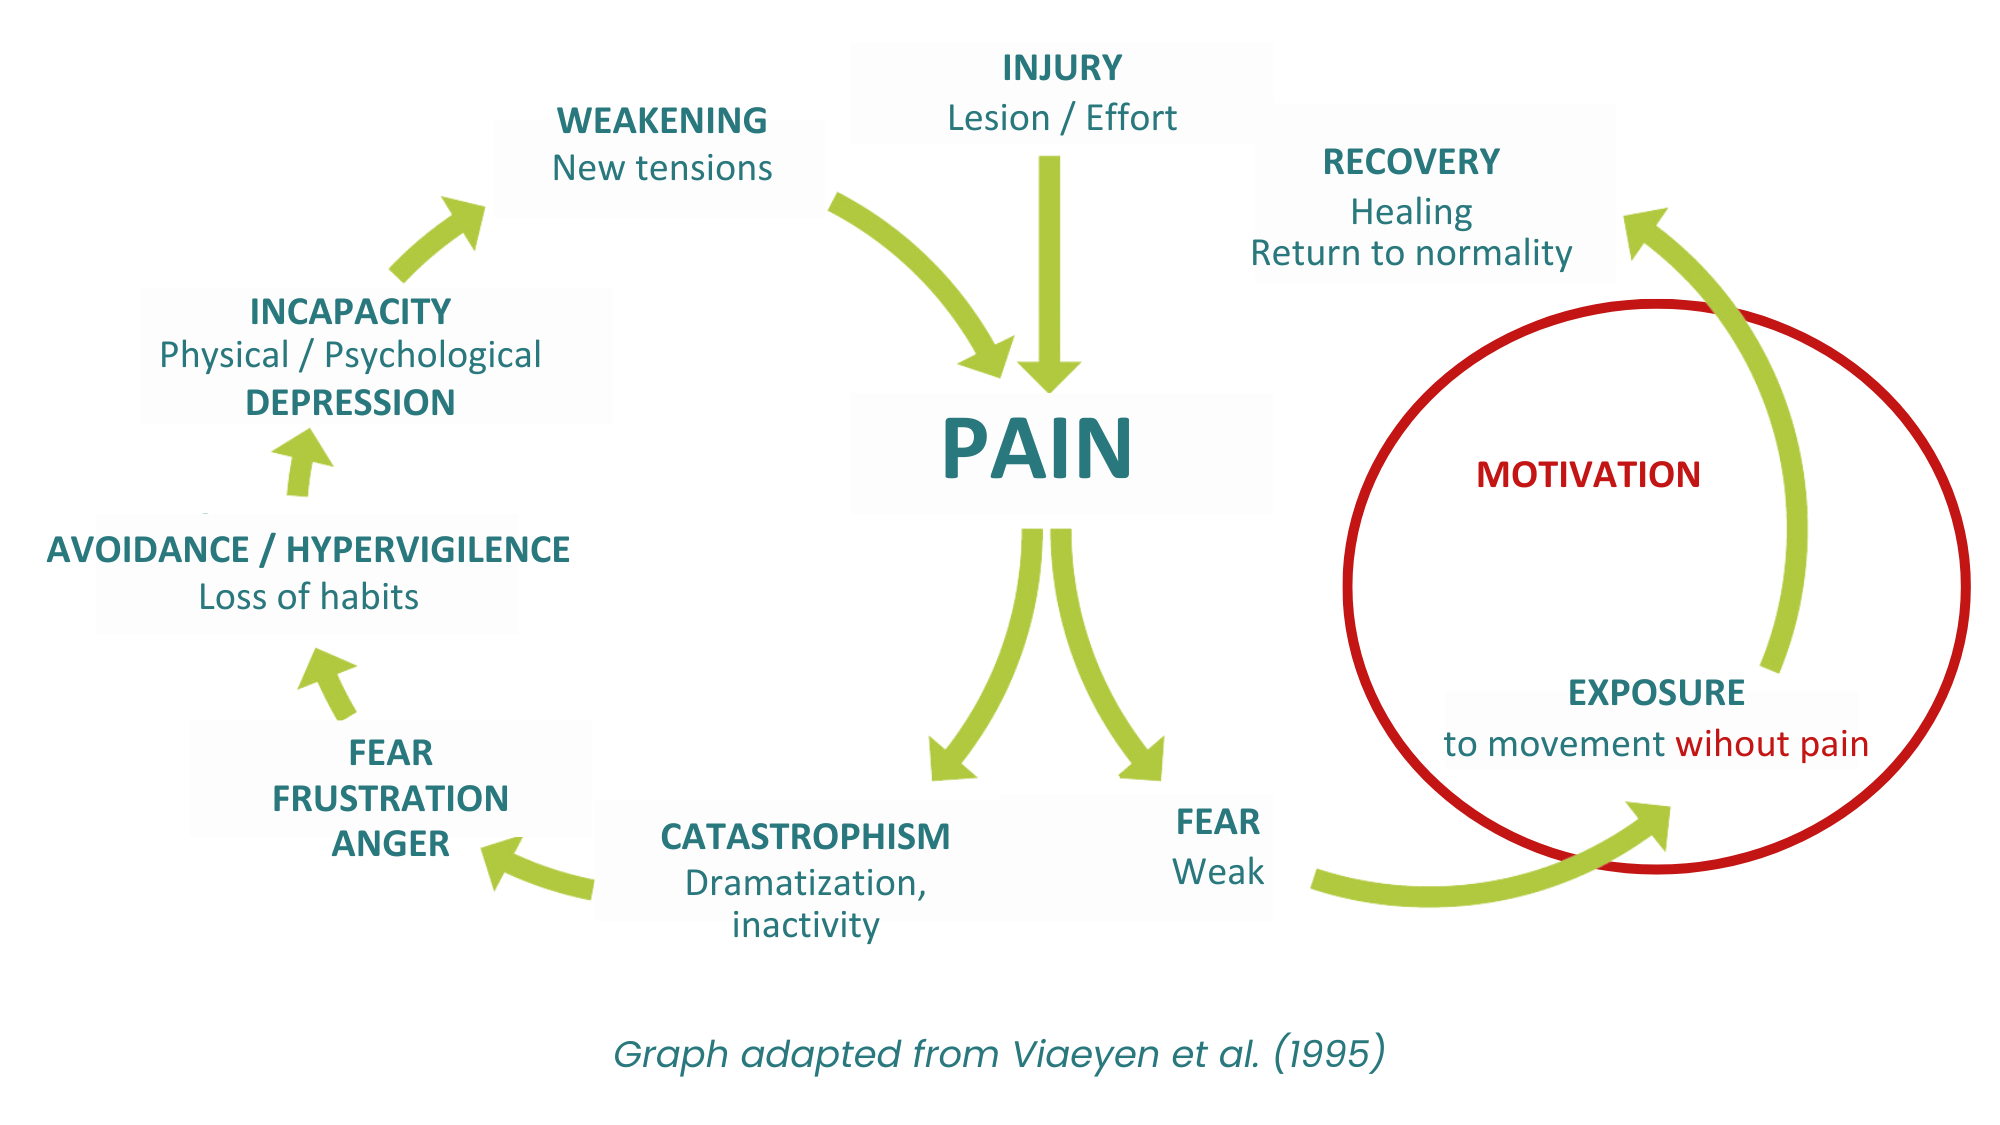 Movement can be the key to overcoming pain